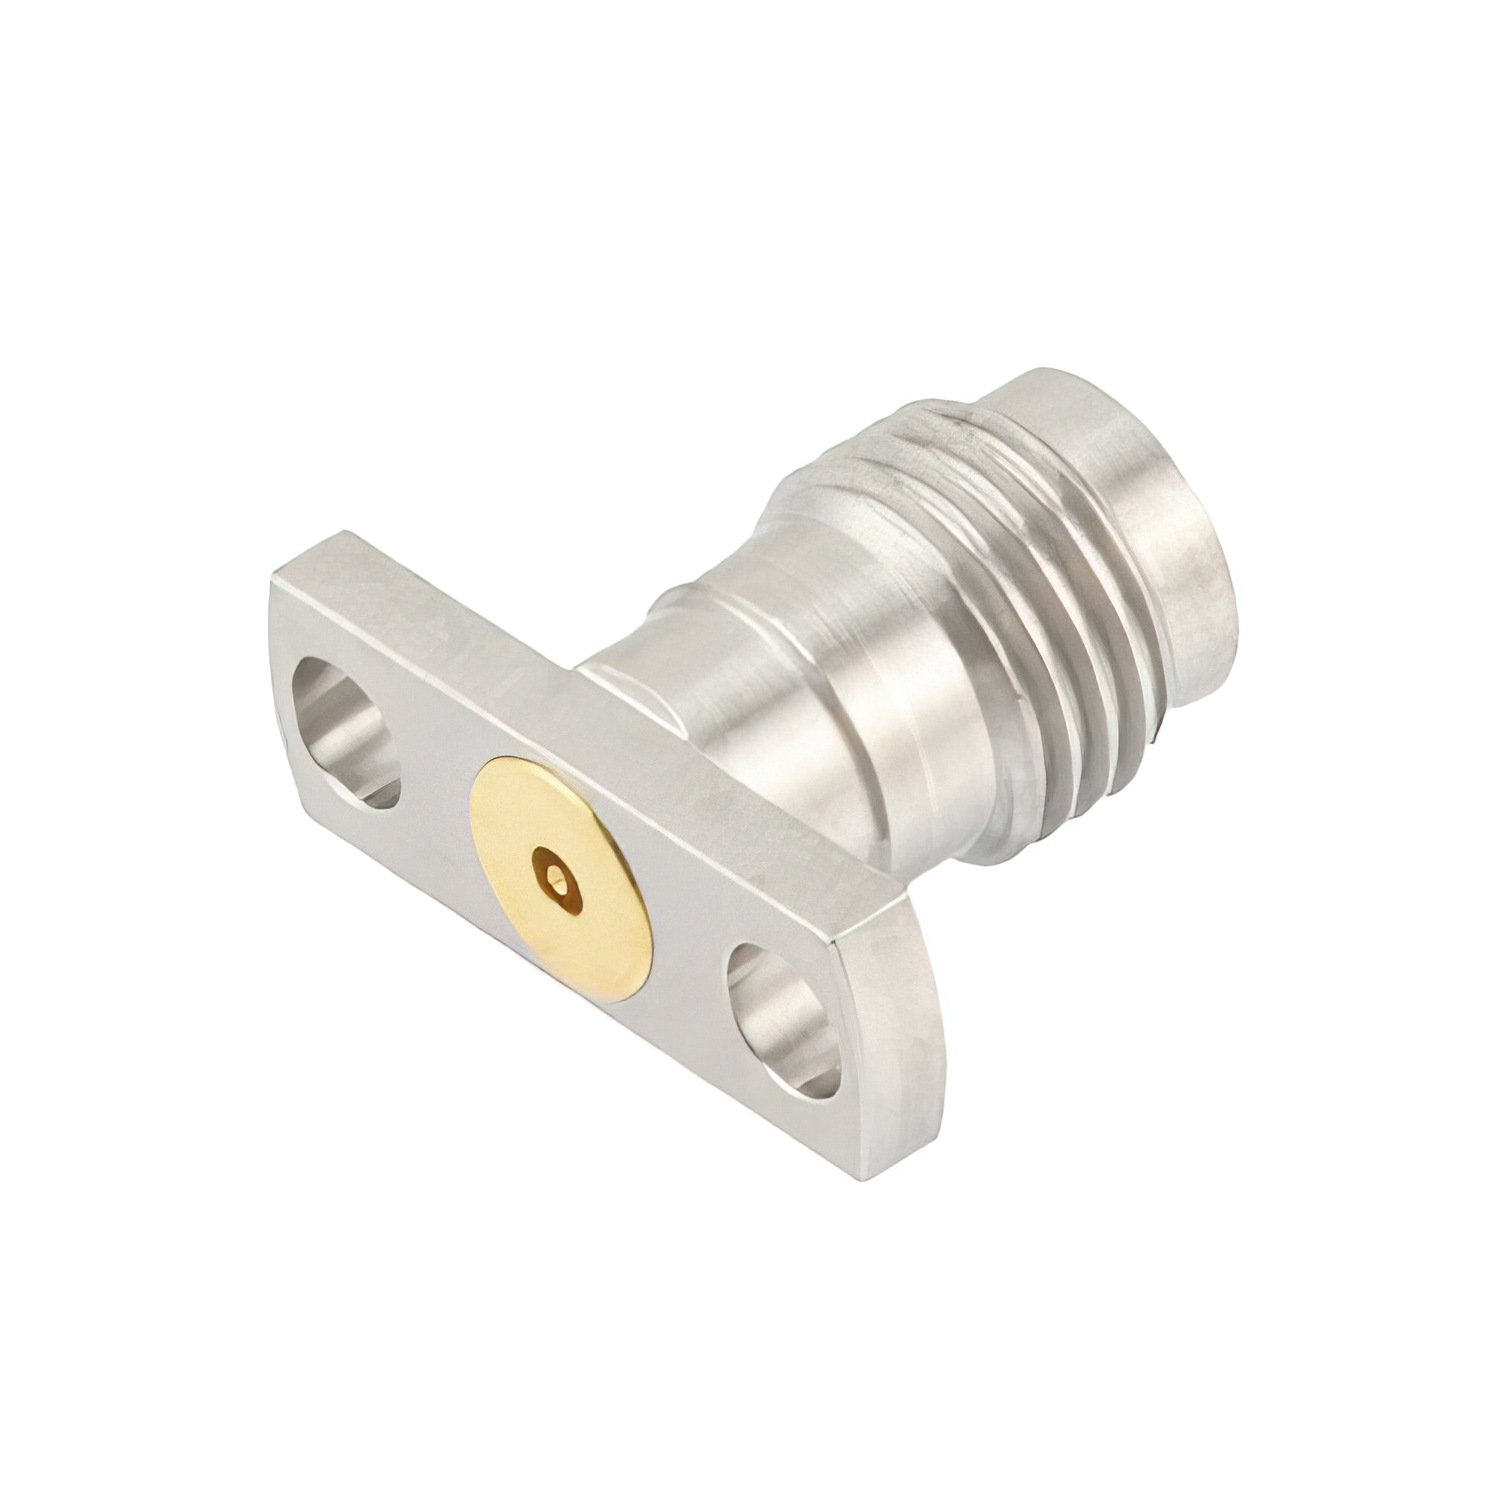 1.85mm Female Field Replaceable Connector 2 Hole Flange Mount 2